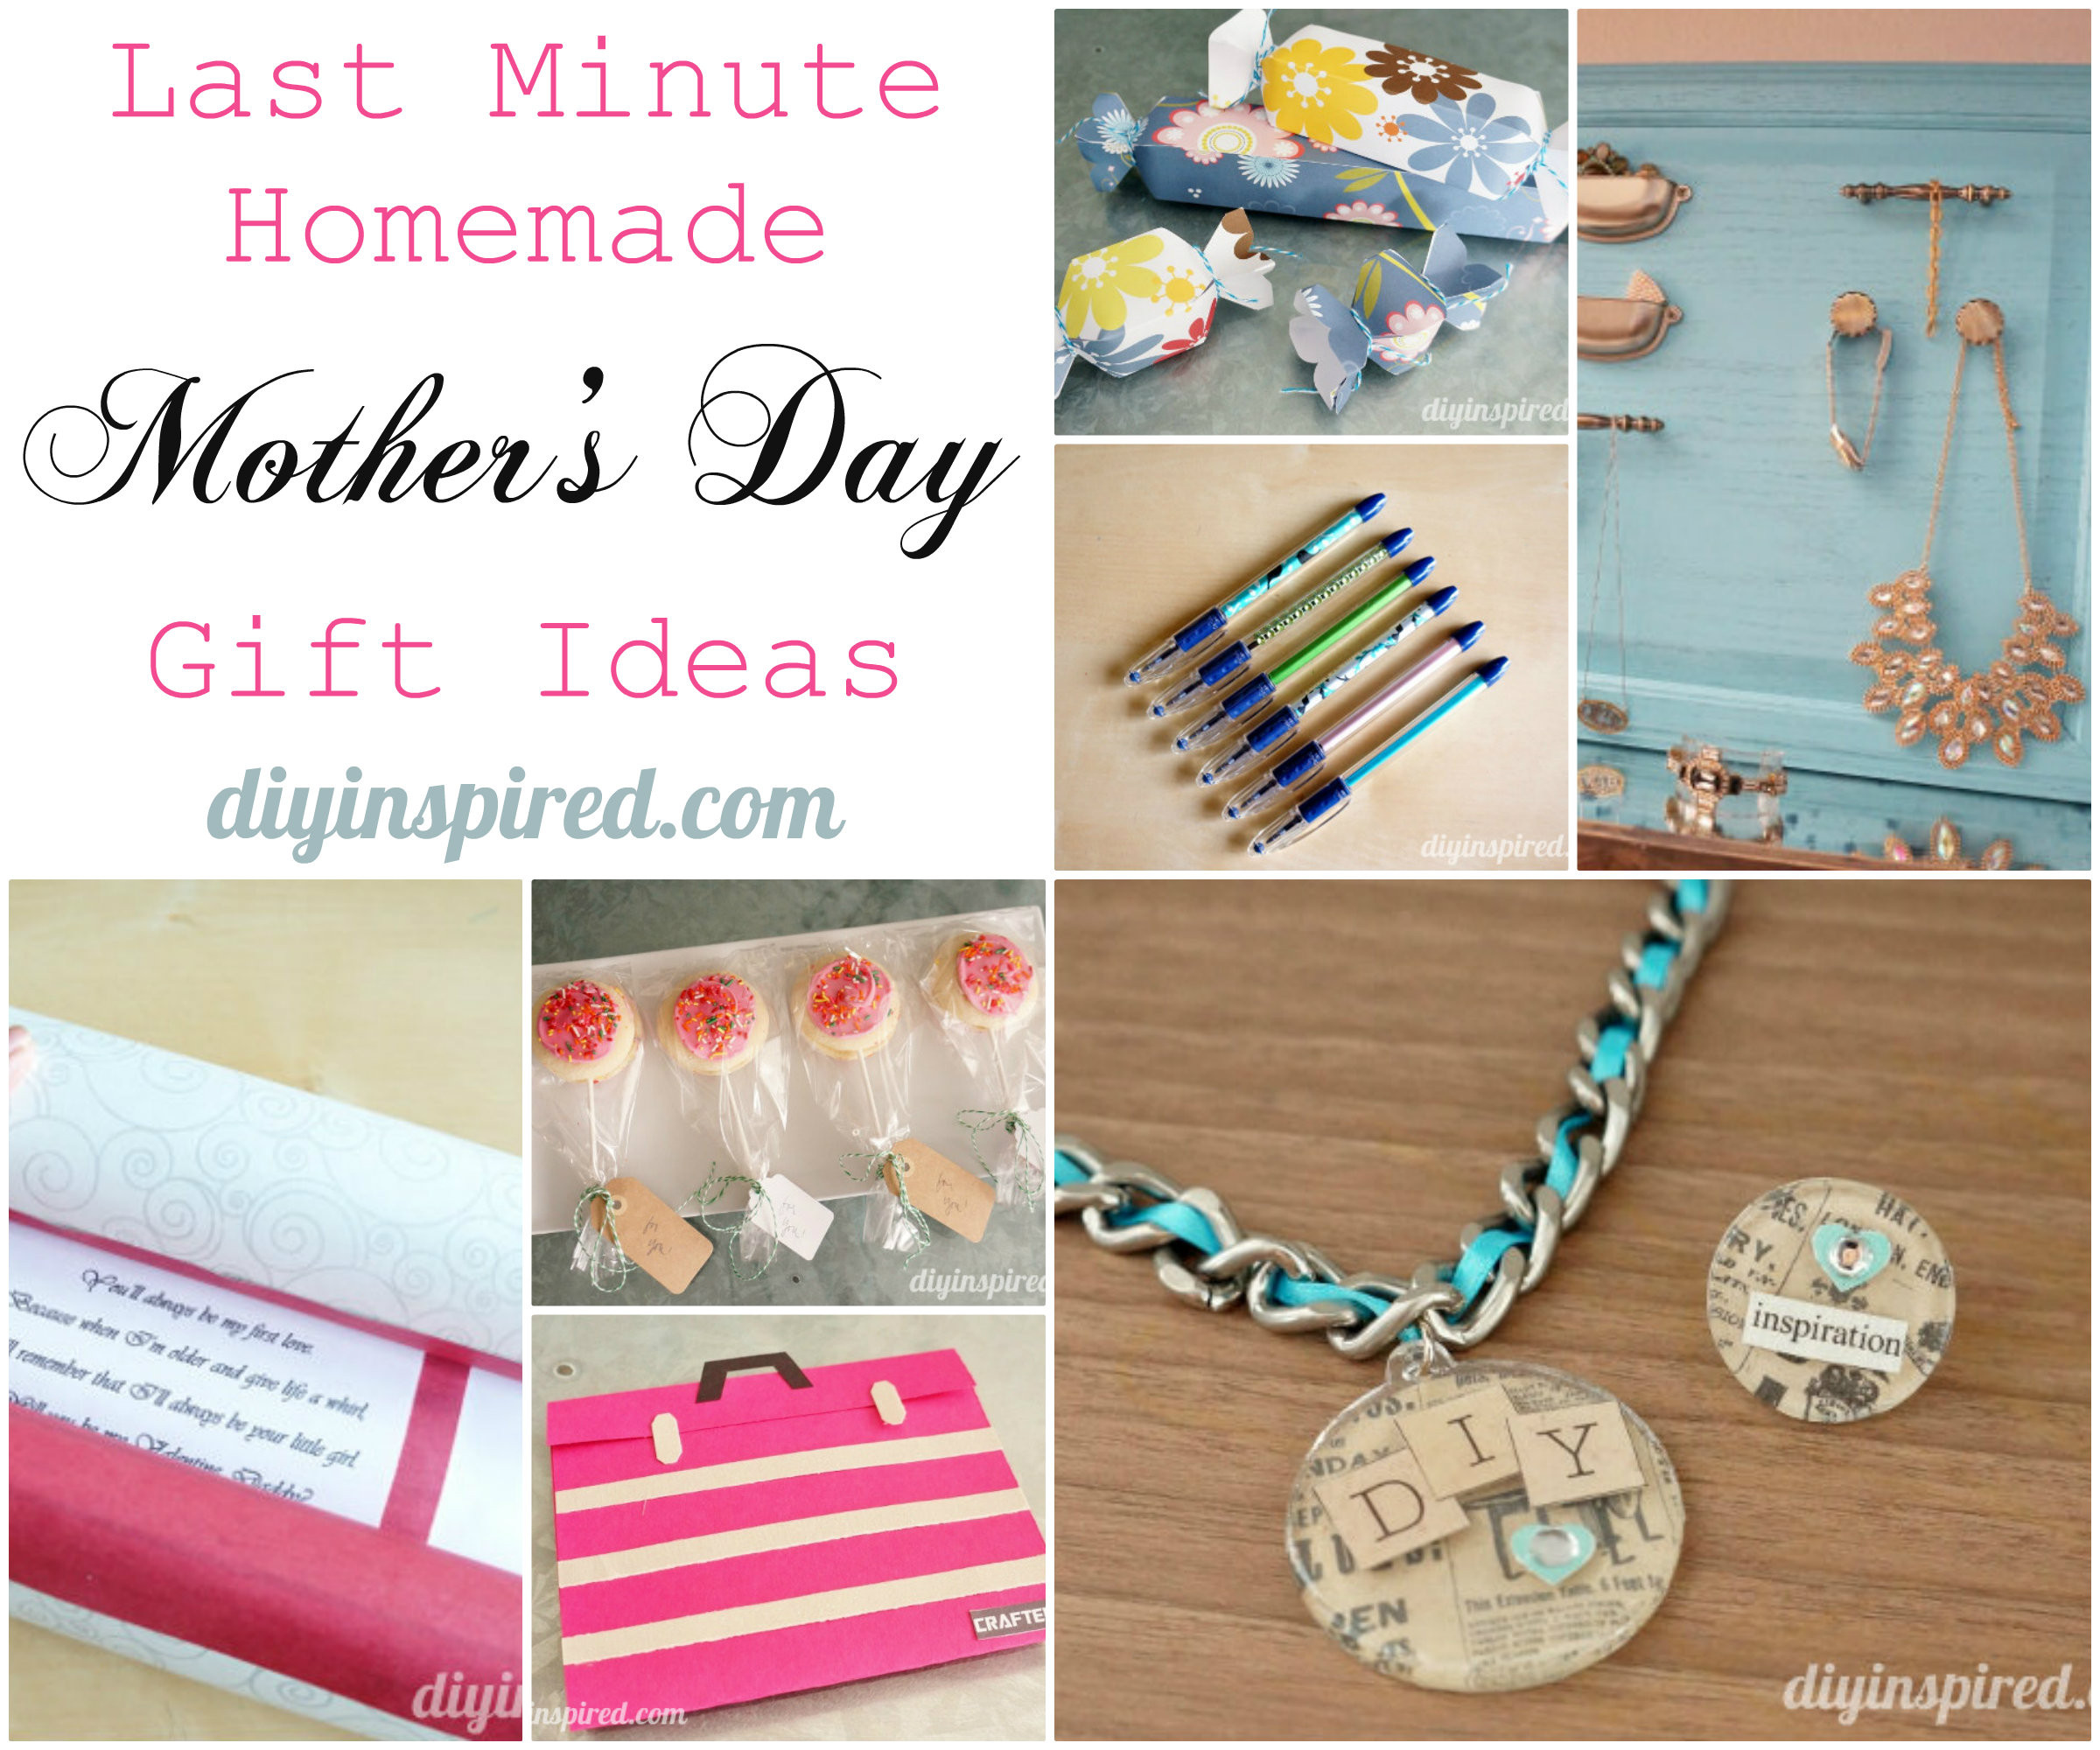 Homemade Mothers Day Gift Ideas
 Last Minute Homemade Mother’s Day Gift Ideas DIY Inspired